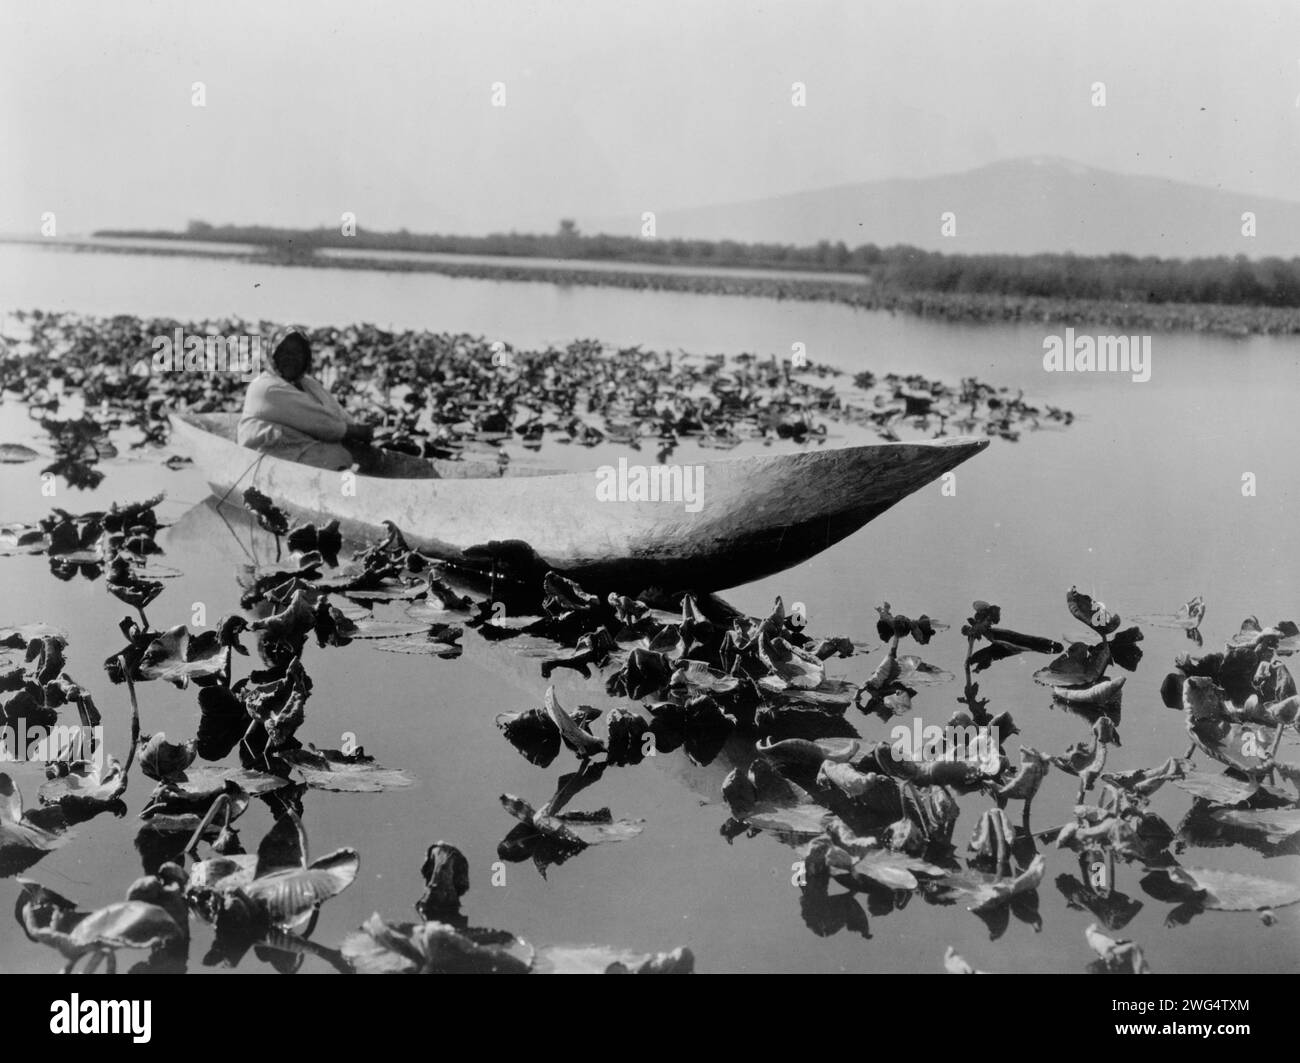 The wokas season-Klamath, c1923. Photograph shows a Klamath woman in a dugout canoe resting in a field of wokas, or great yellow water lilies (nymphaea polysepala) used as food, probably in the Klamath Basin area of Oregon. Stock Photo